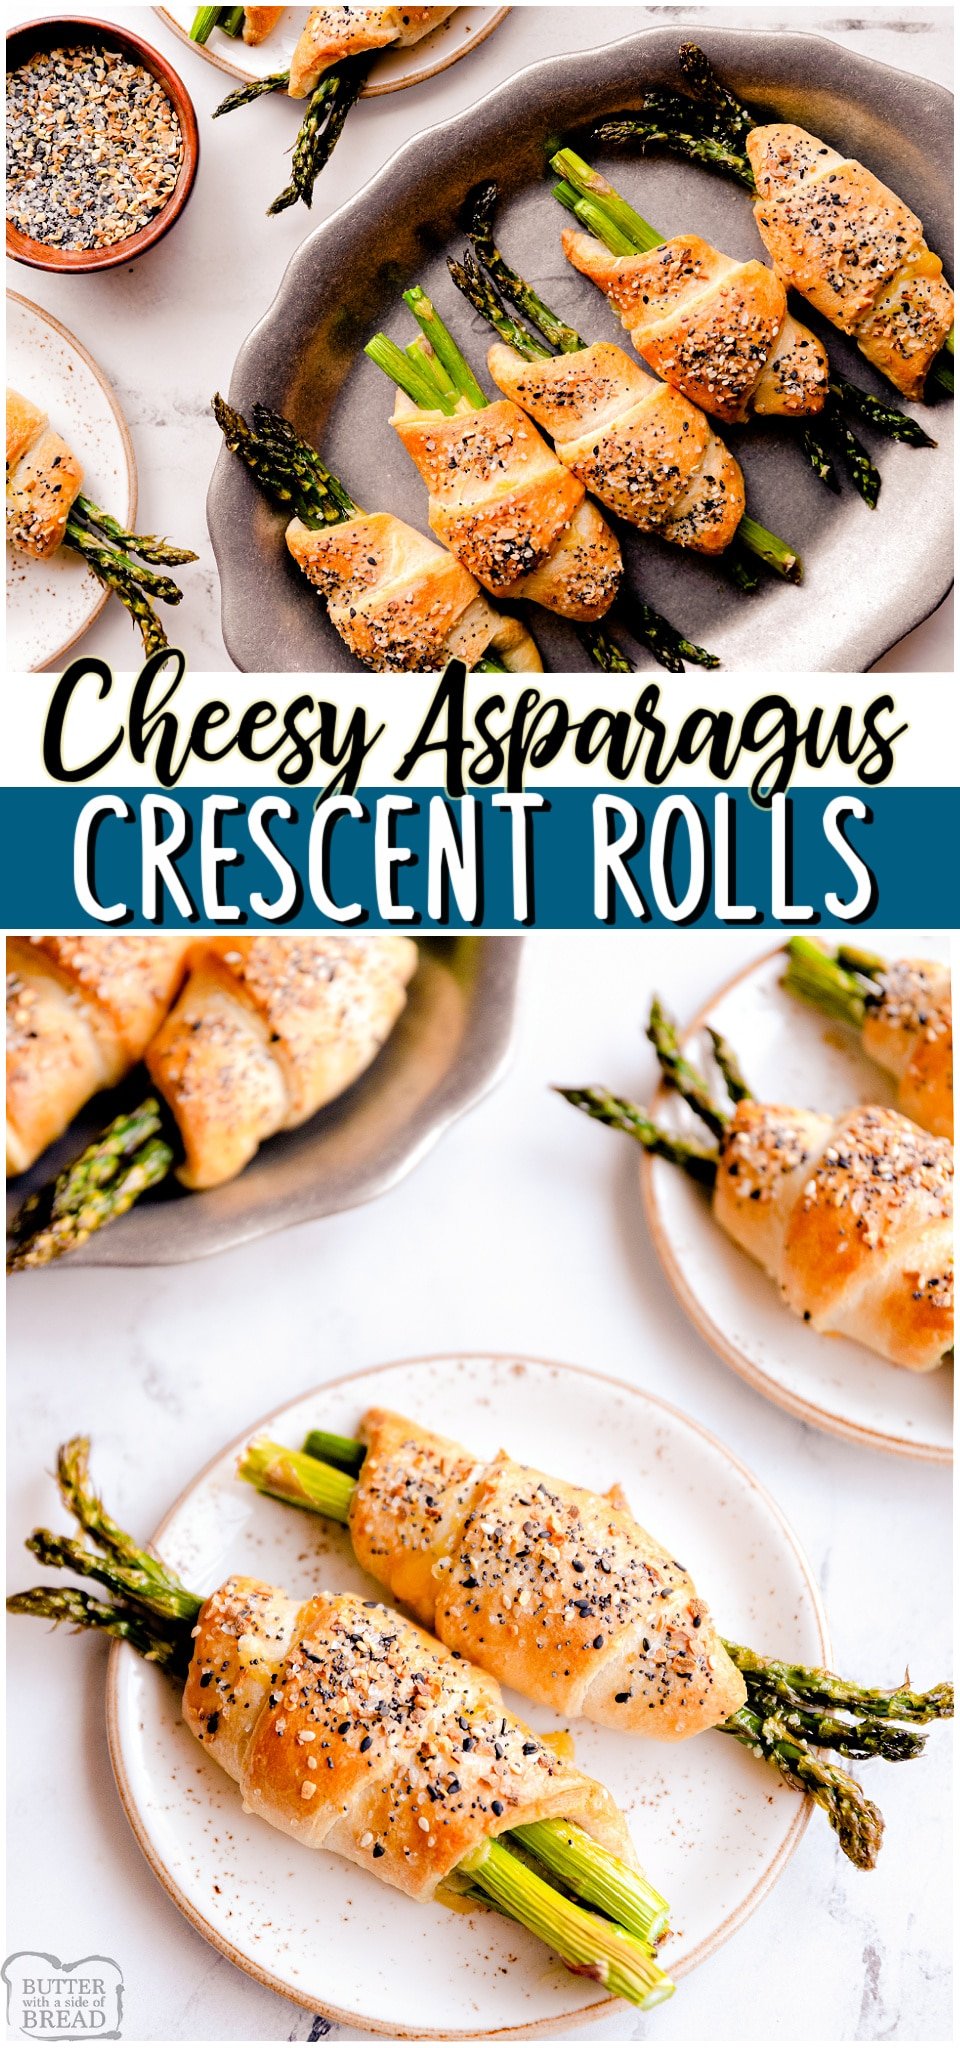 Asparagus crescent rolls are a deliciously simple appetizer made with fresh asparagus, crescent rolls & cheese! Flavorful vegetable dish that's perfect with dinner or at a party!